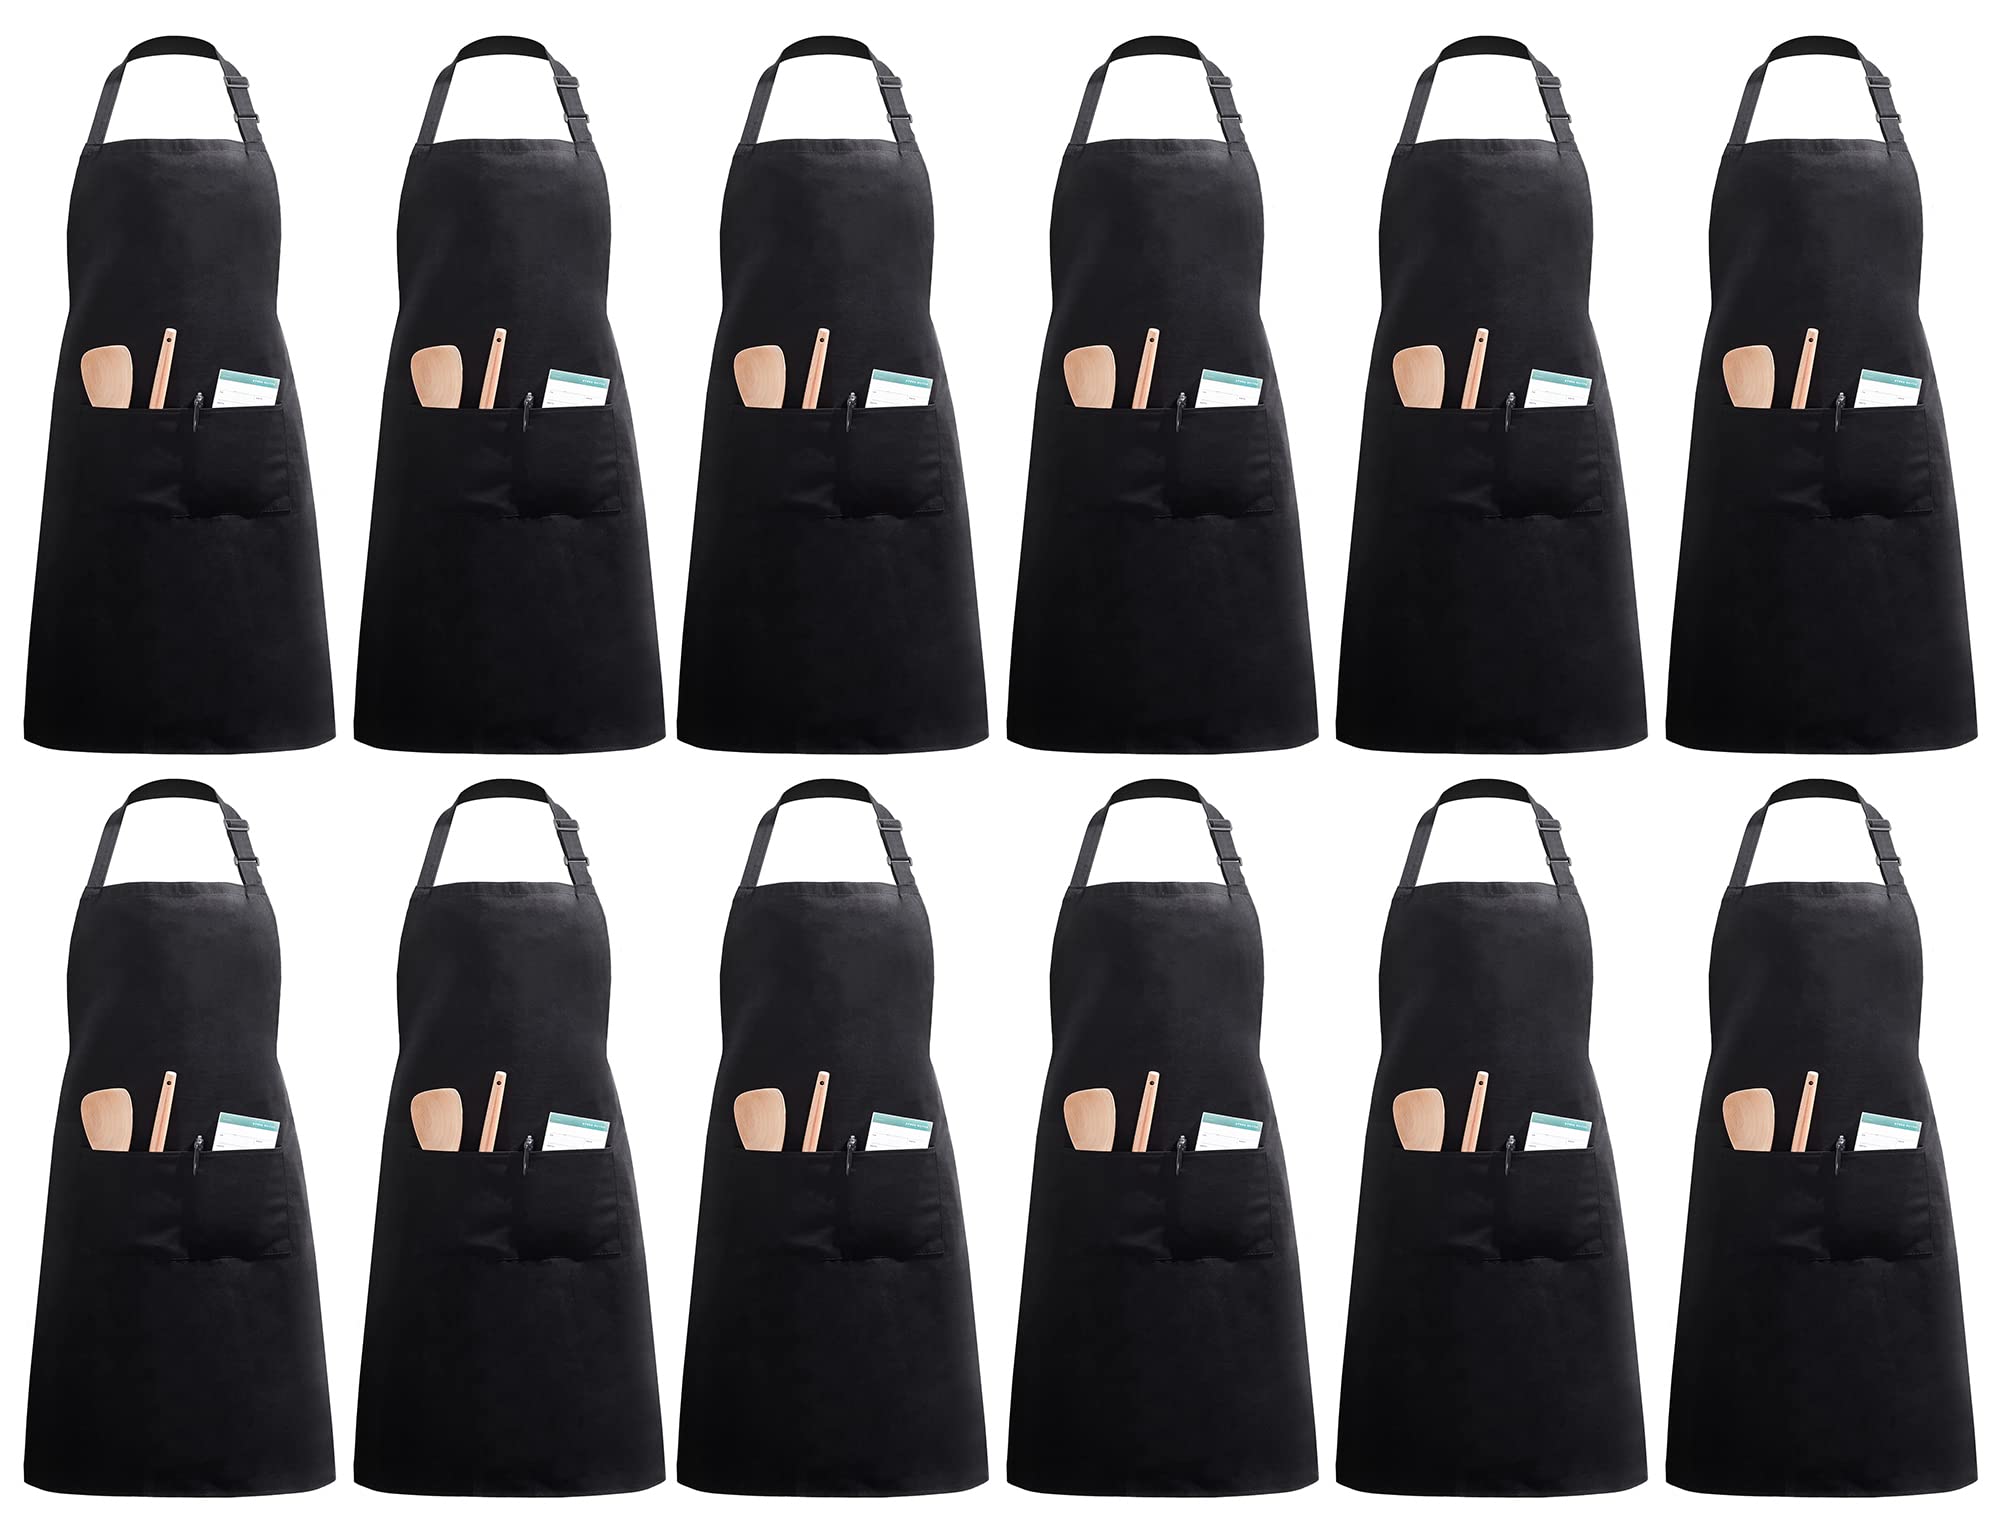 InnoGear Aprons 12 Pcs Chef Aprons with 2 Pockets Unisex Adjustable Men Aprons Women Aprons for Home Kitchen, Restaurant, Coffee house (Black Polyester)